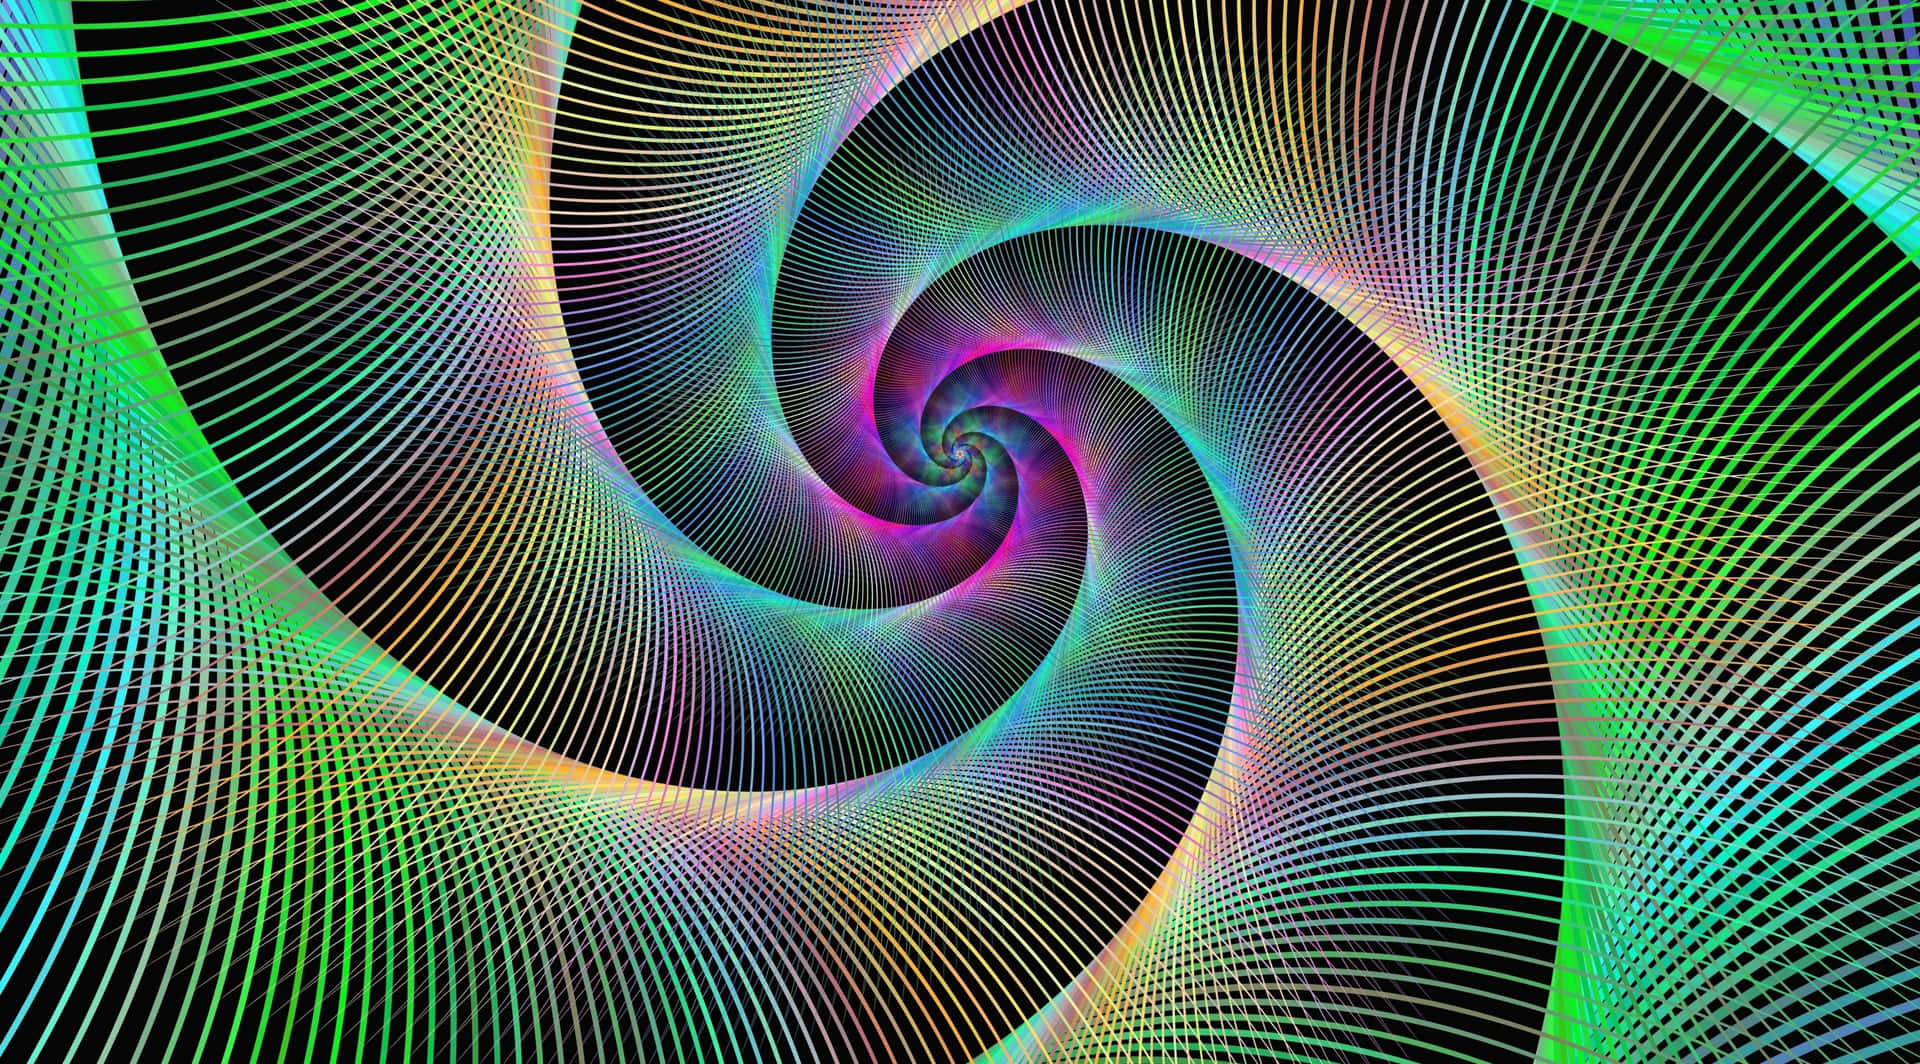 Psychedelic Spiral Pattern Wallpaper